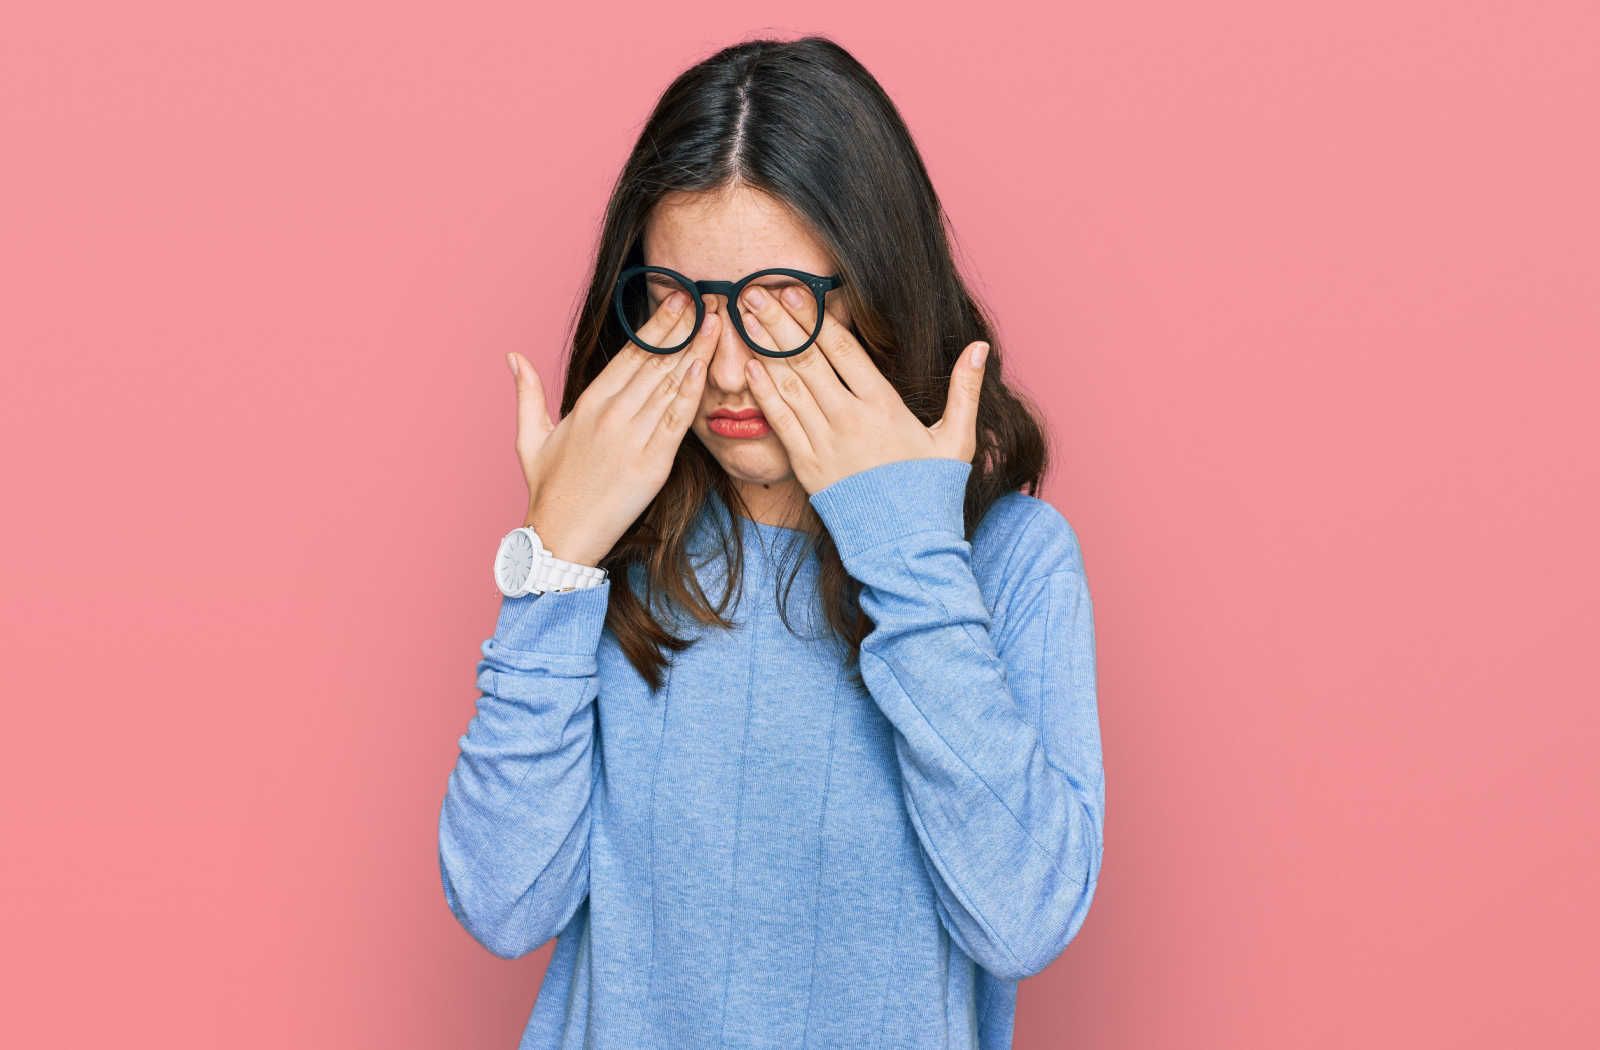 A young girl in a blue sweater, rubbing her eyes due to the discomfort she is feeling as a result of dry eye.